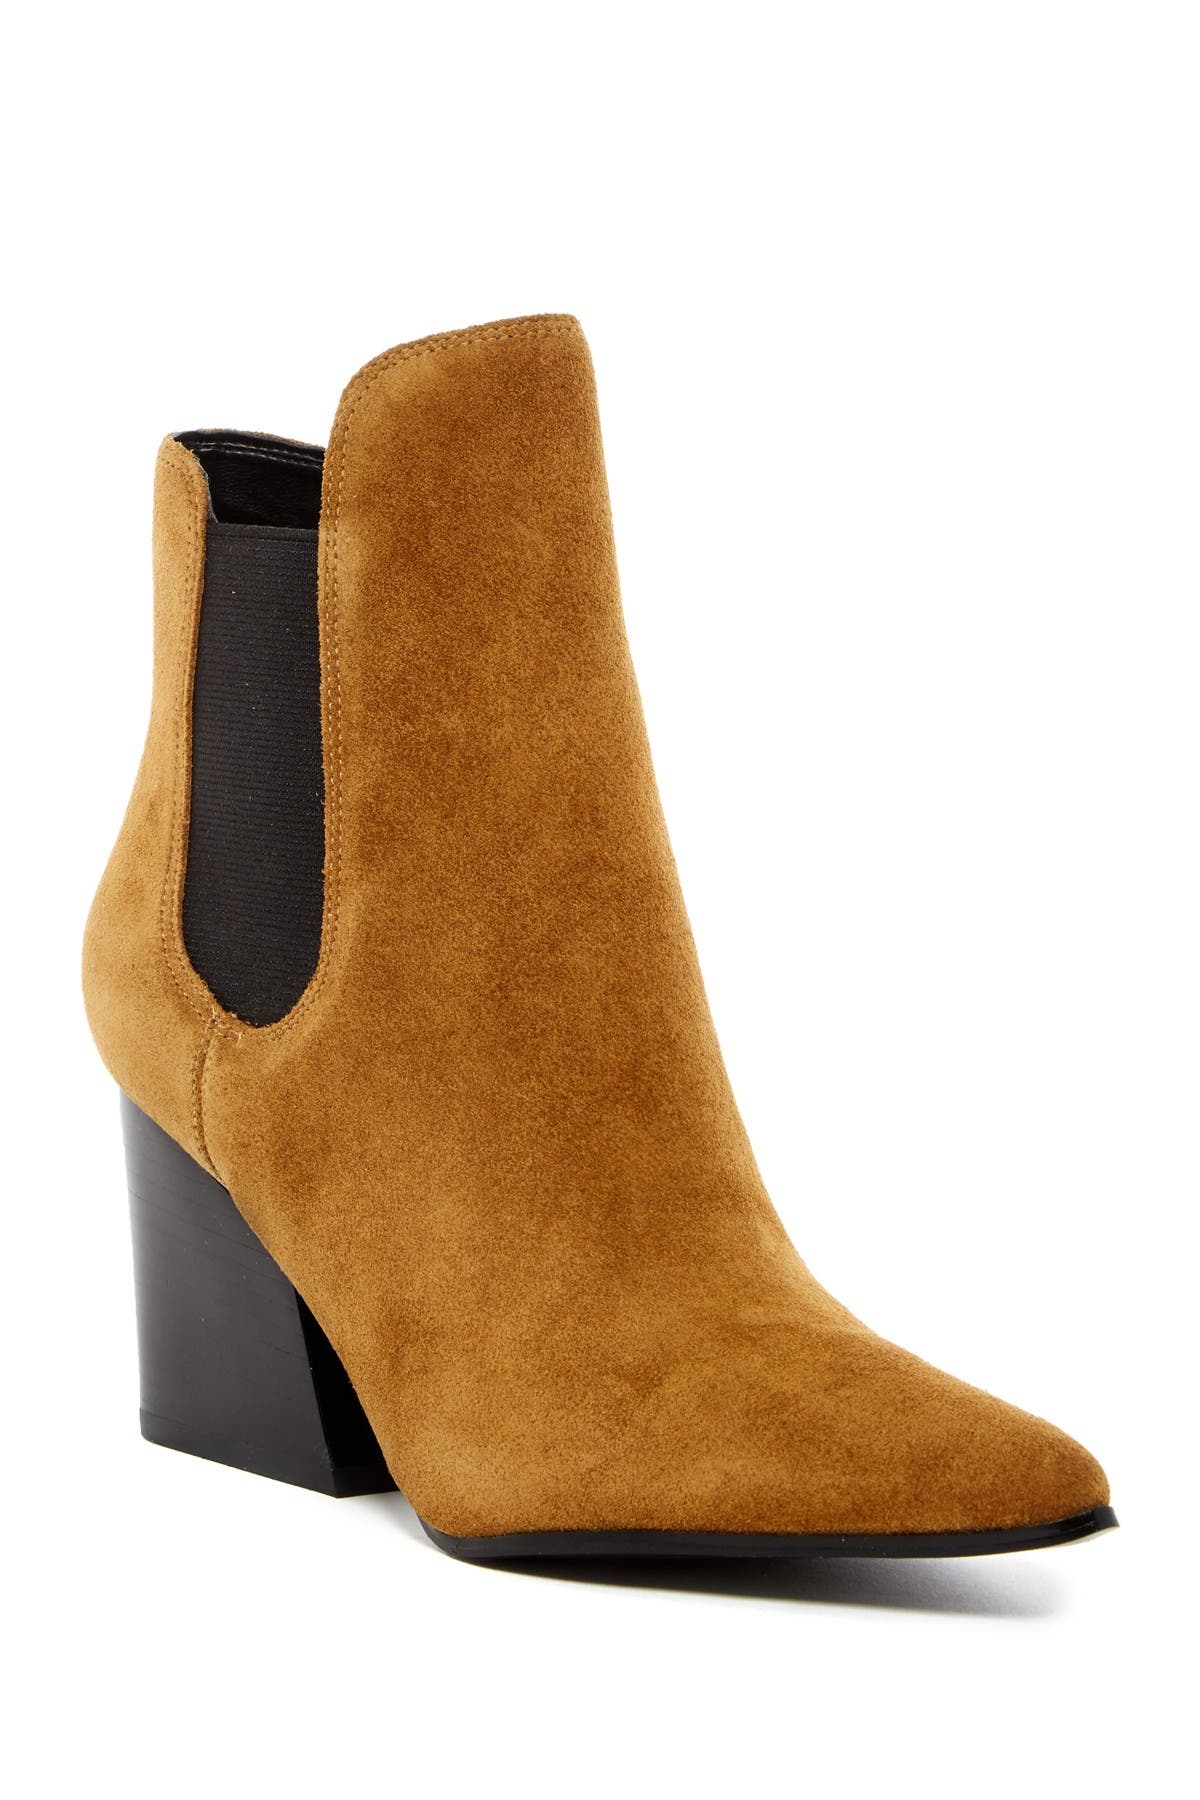 kendall and kylie pointed toe chelsea bootie